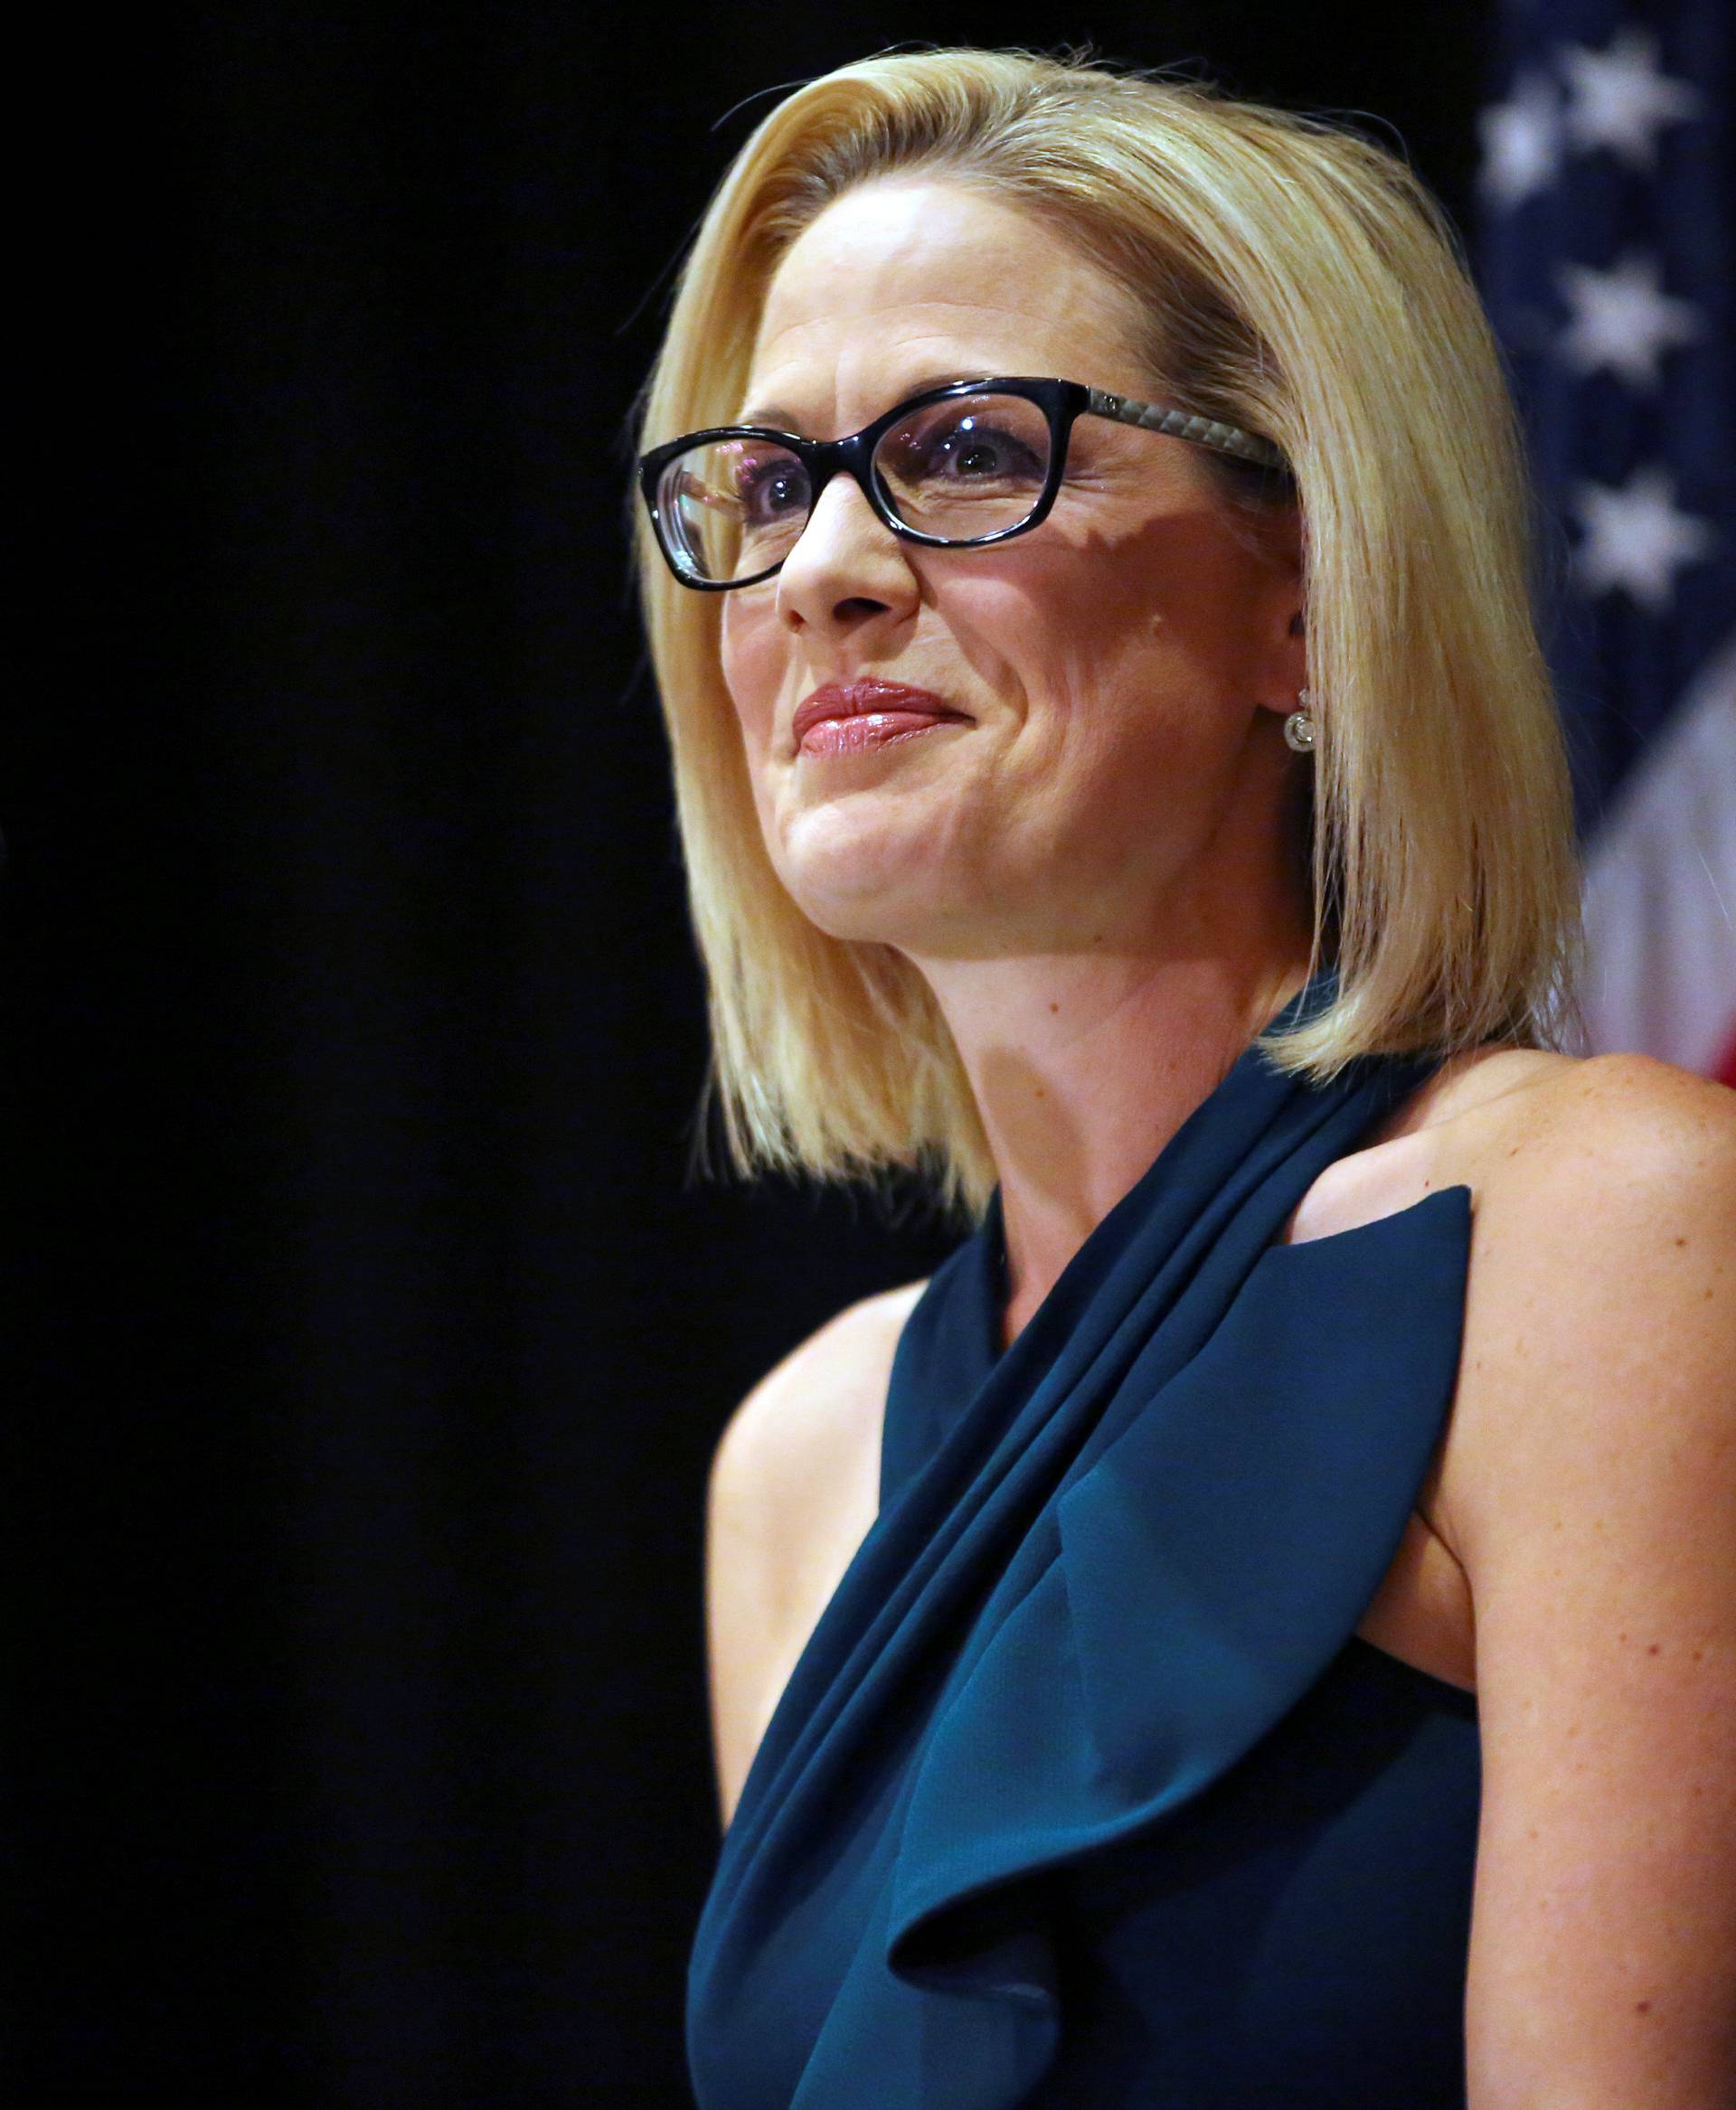 Democratic candidate Sinema speaks to supporters after officially winning the U.S. Senate race in Phoenix